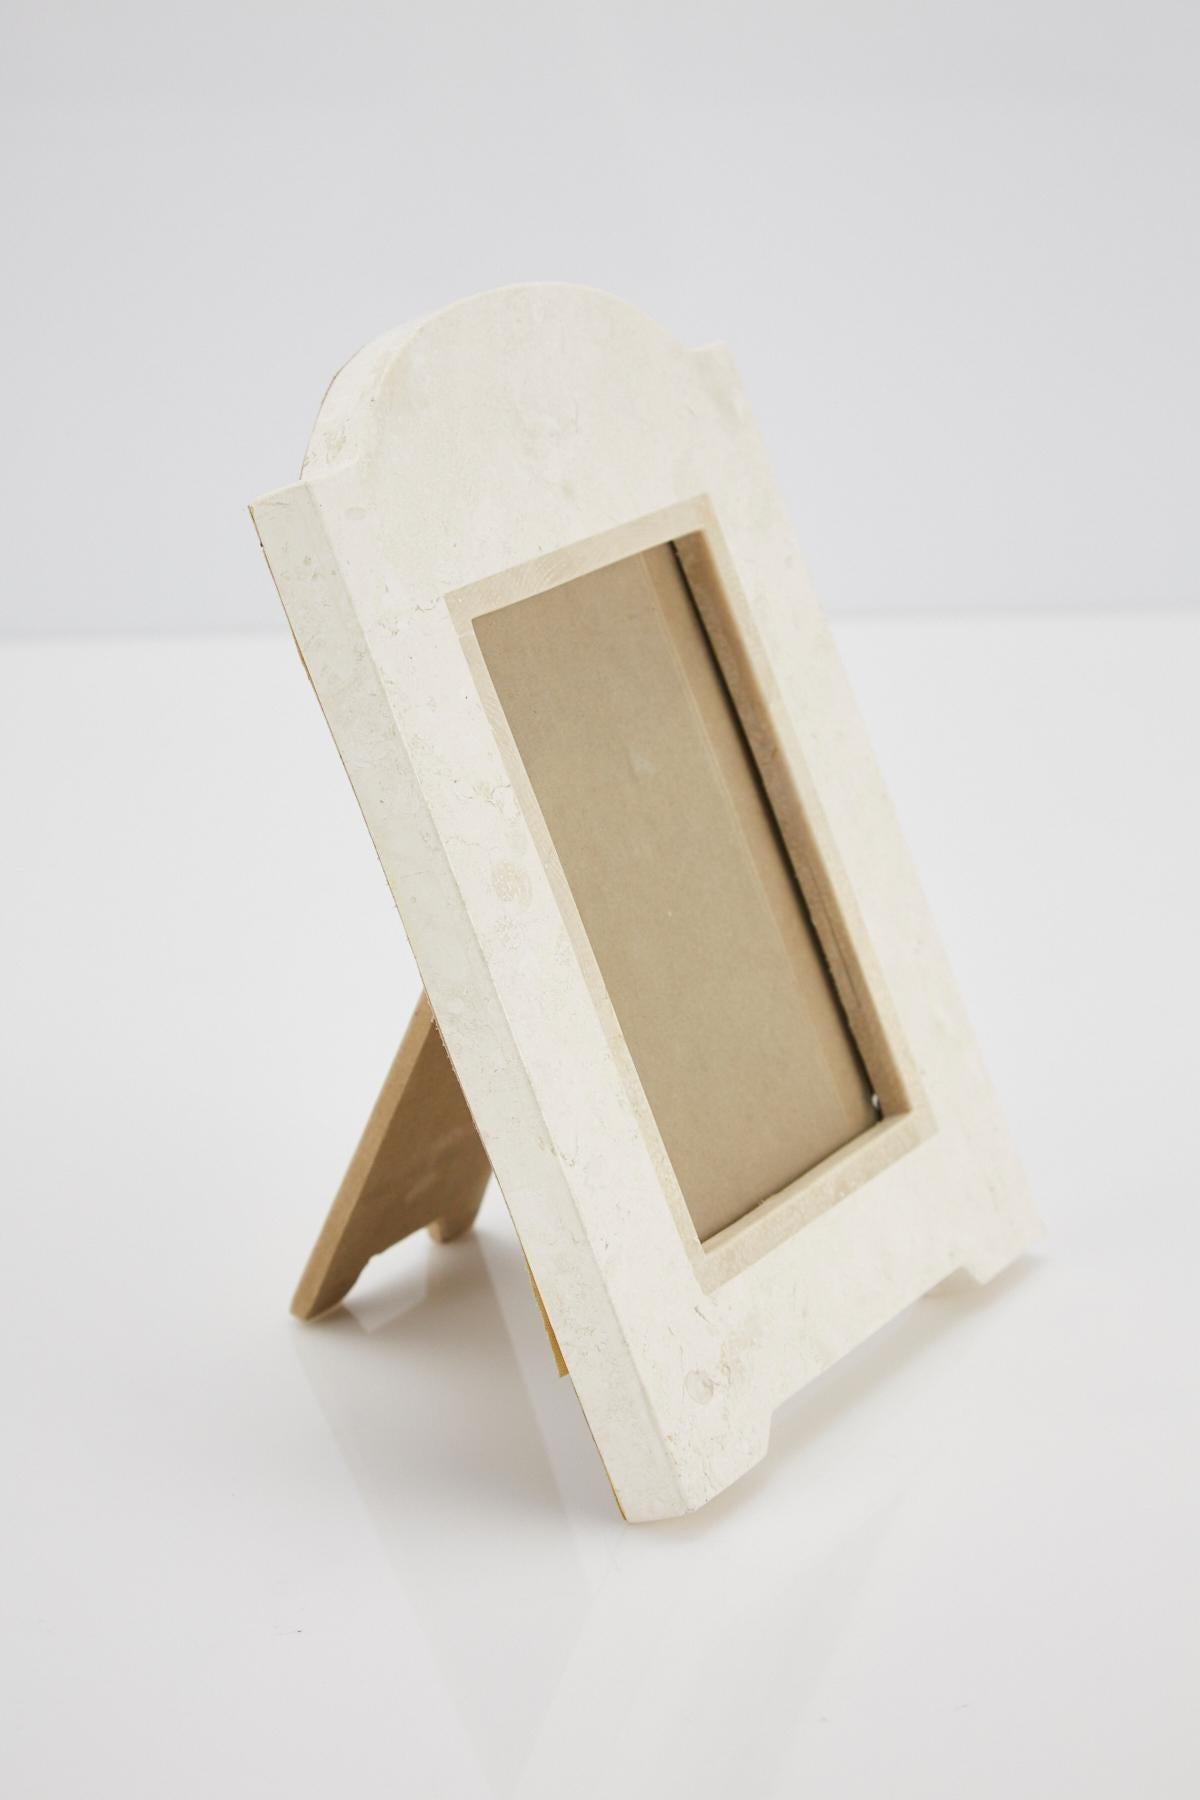 Postmodern White and Beige Arched Tessellated Stone Picture Frame, 1990s (Postmoderne) im Angebot